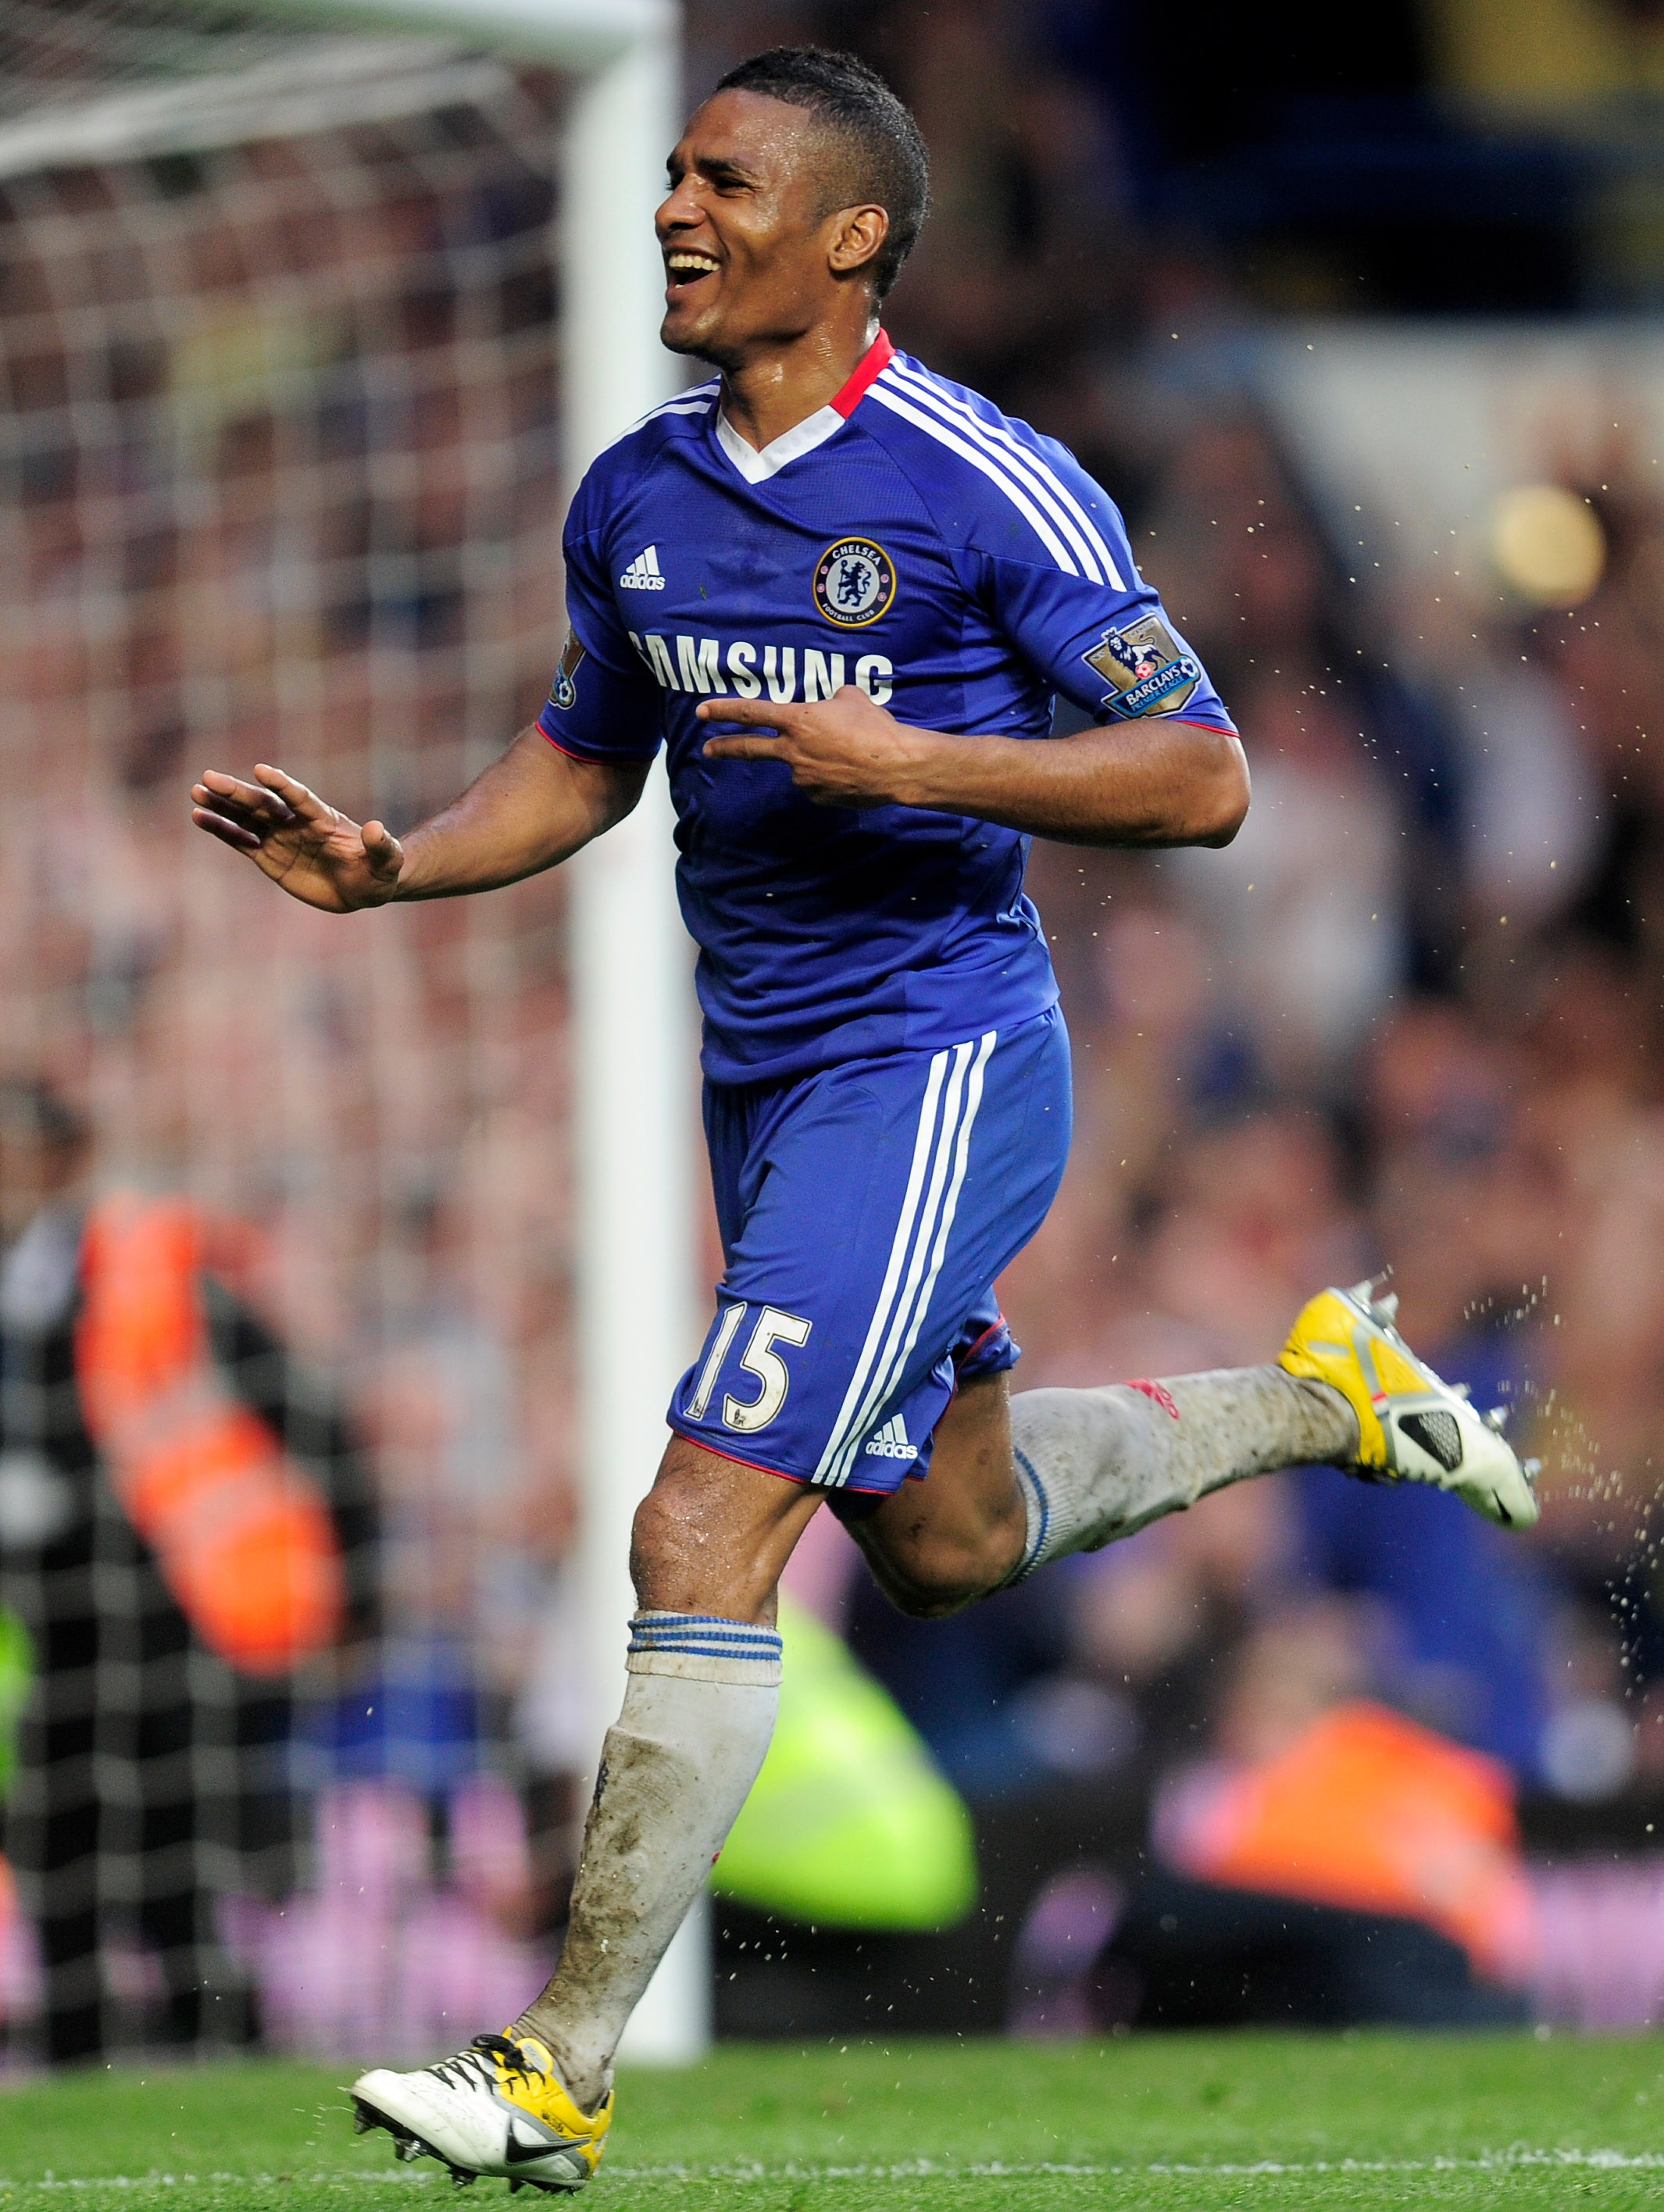 LONDON, ENGLAND - APRIL 23:  Florent  Malouda of Chelsea celebrates after scoring his team's third goal during the Barclays Premier League match between Chelsea and West Ham United at Stamford Bridge on April 23, 2011 in London, England.  (Photo by Jamie